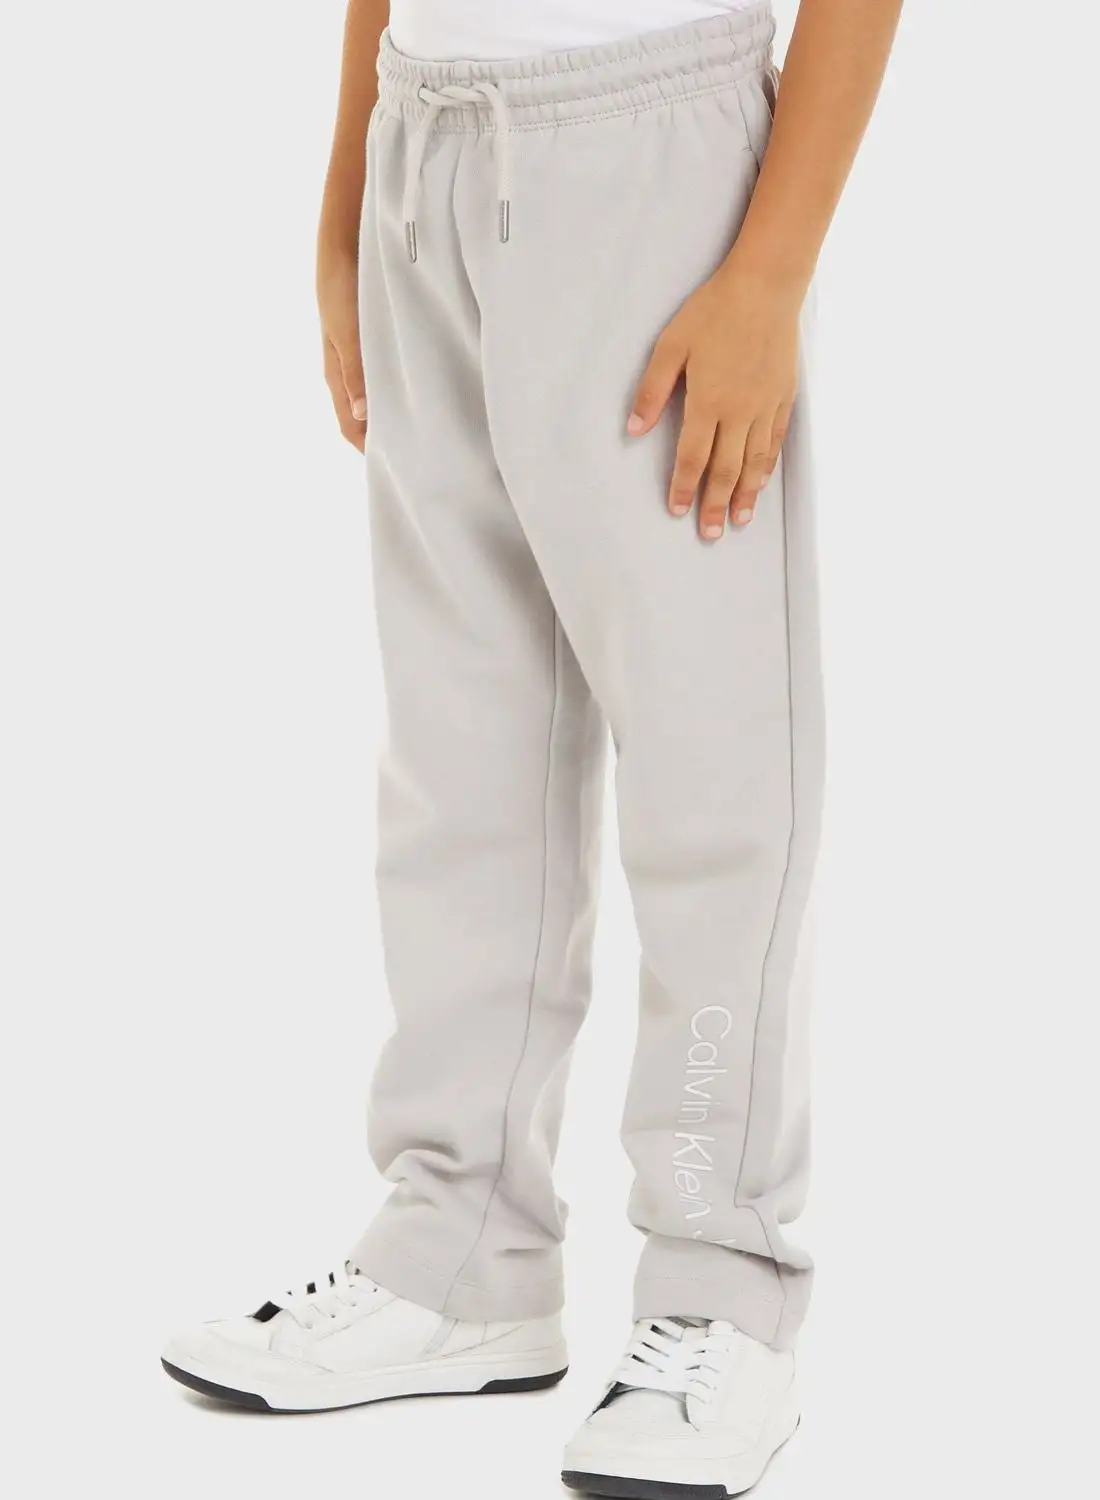 Calvin Klein Jeans Youth Cuffed Sweatpants